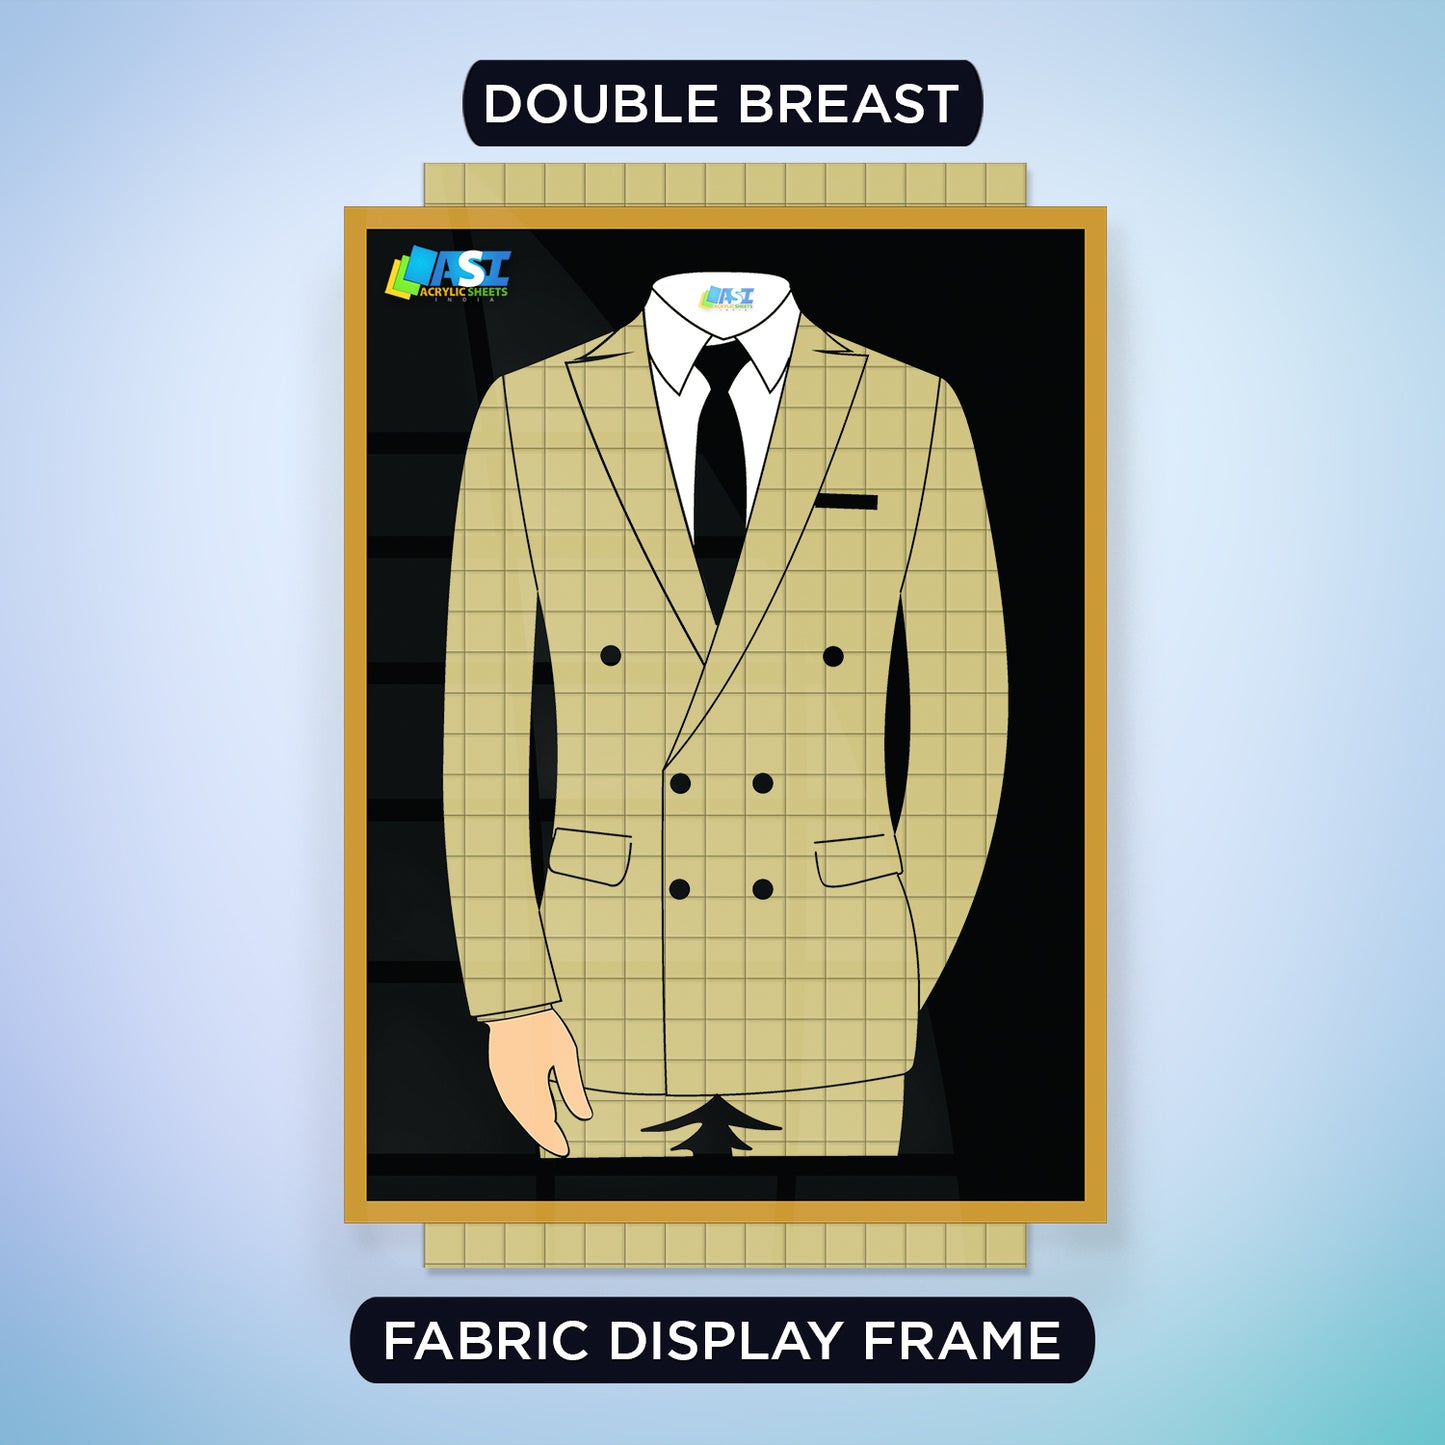 Clothing Projection Frame New Designs